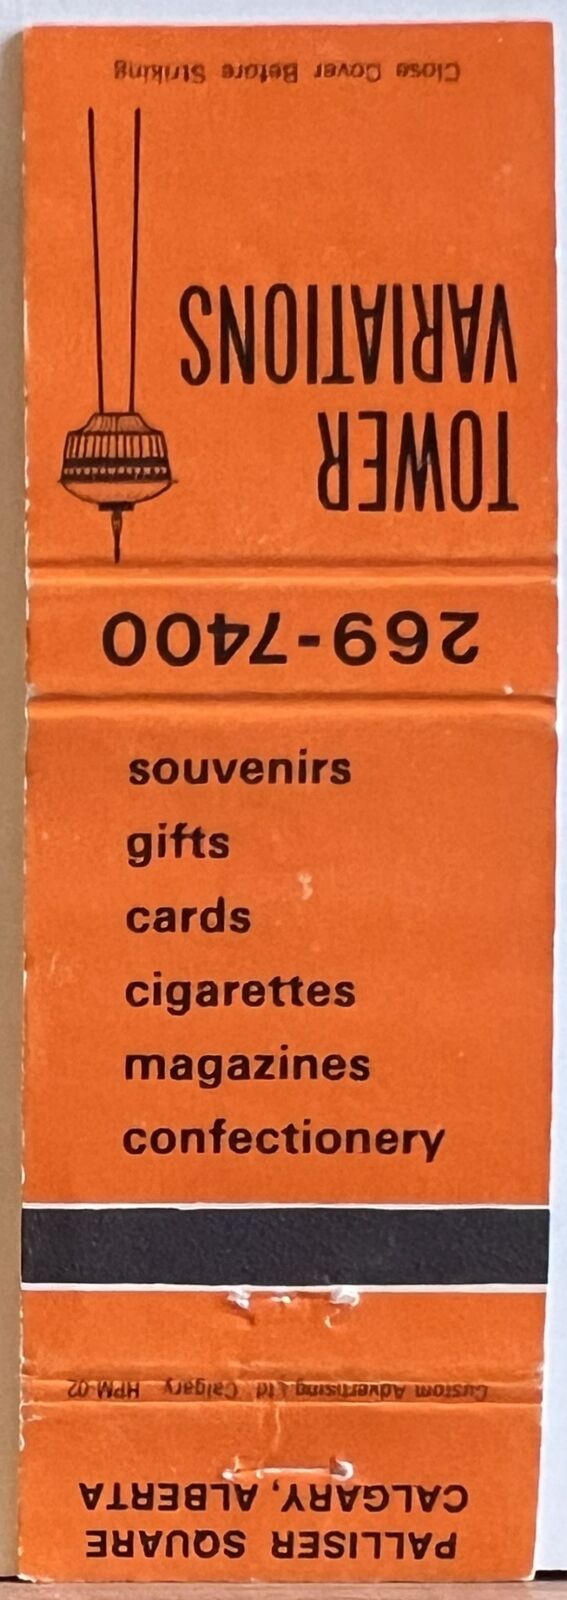 Tower Variations Calgary Alberta Canada Souvenirs Vintage Matchbook Cover